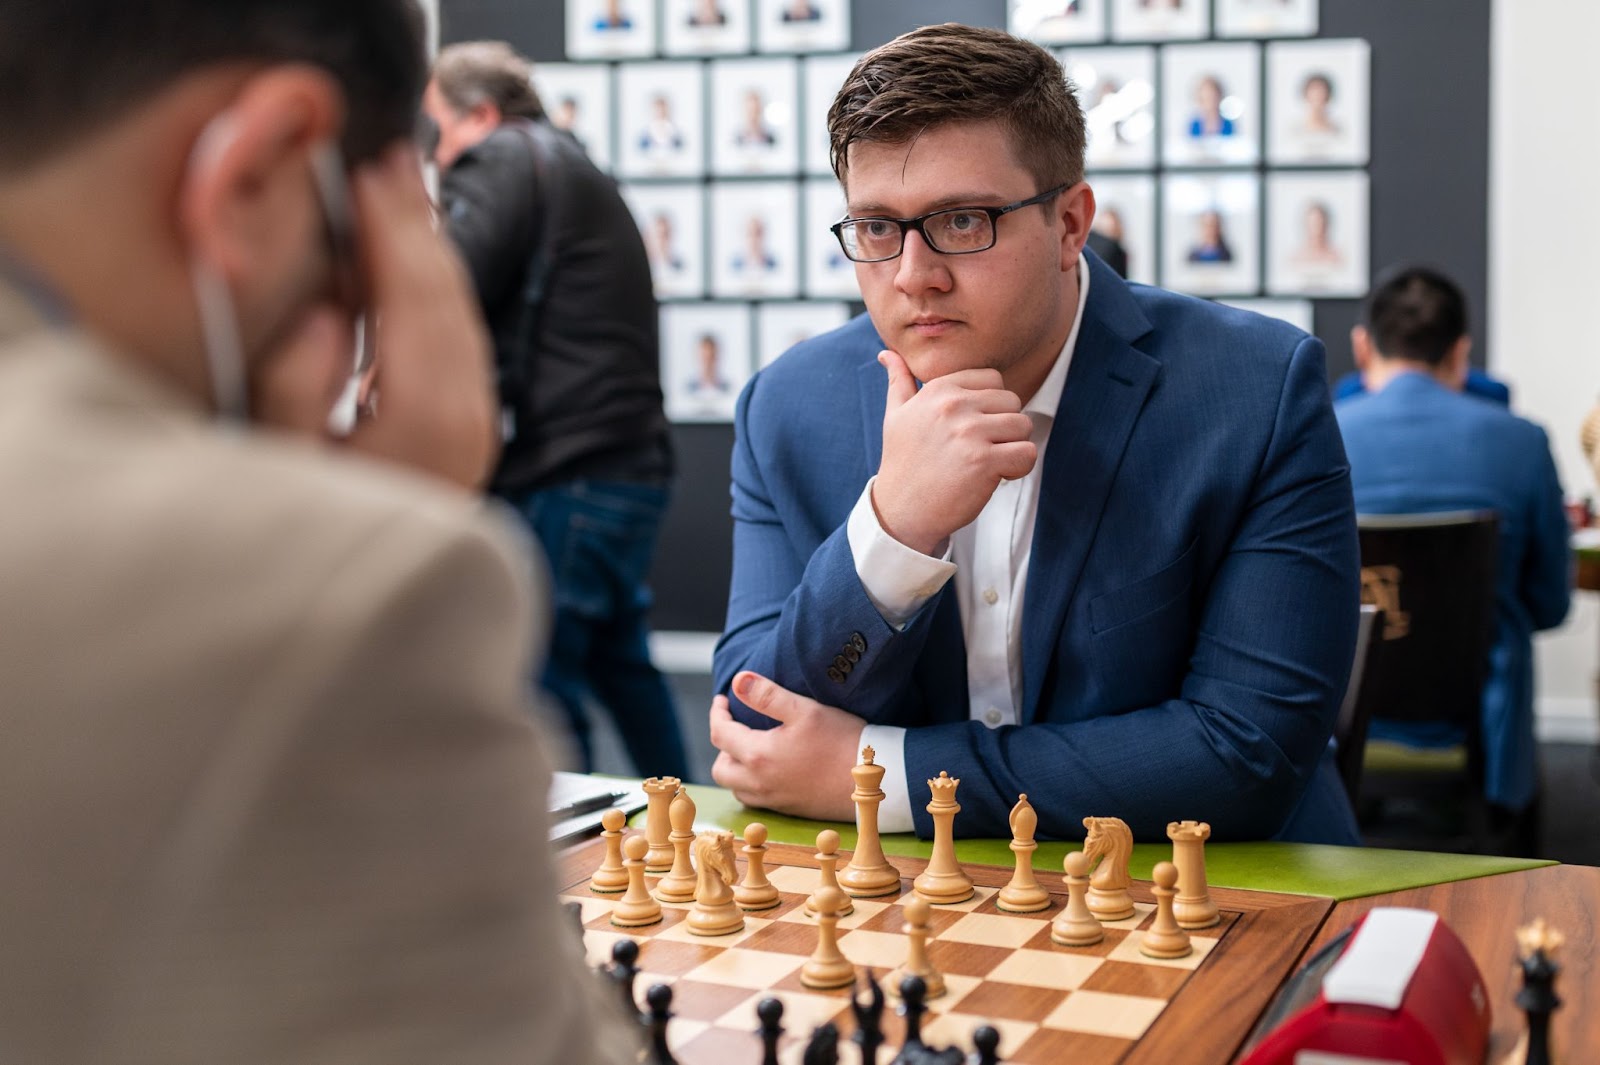 World Open of Chess 2022: Food, Girls, and Being Out of Shape